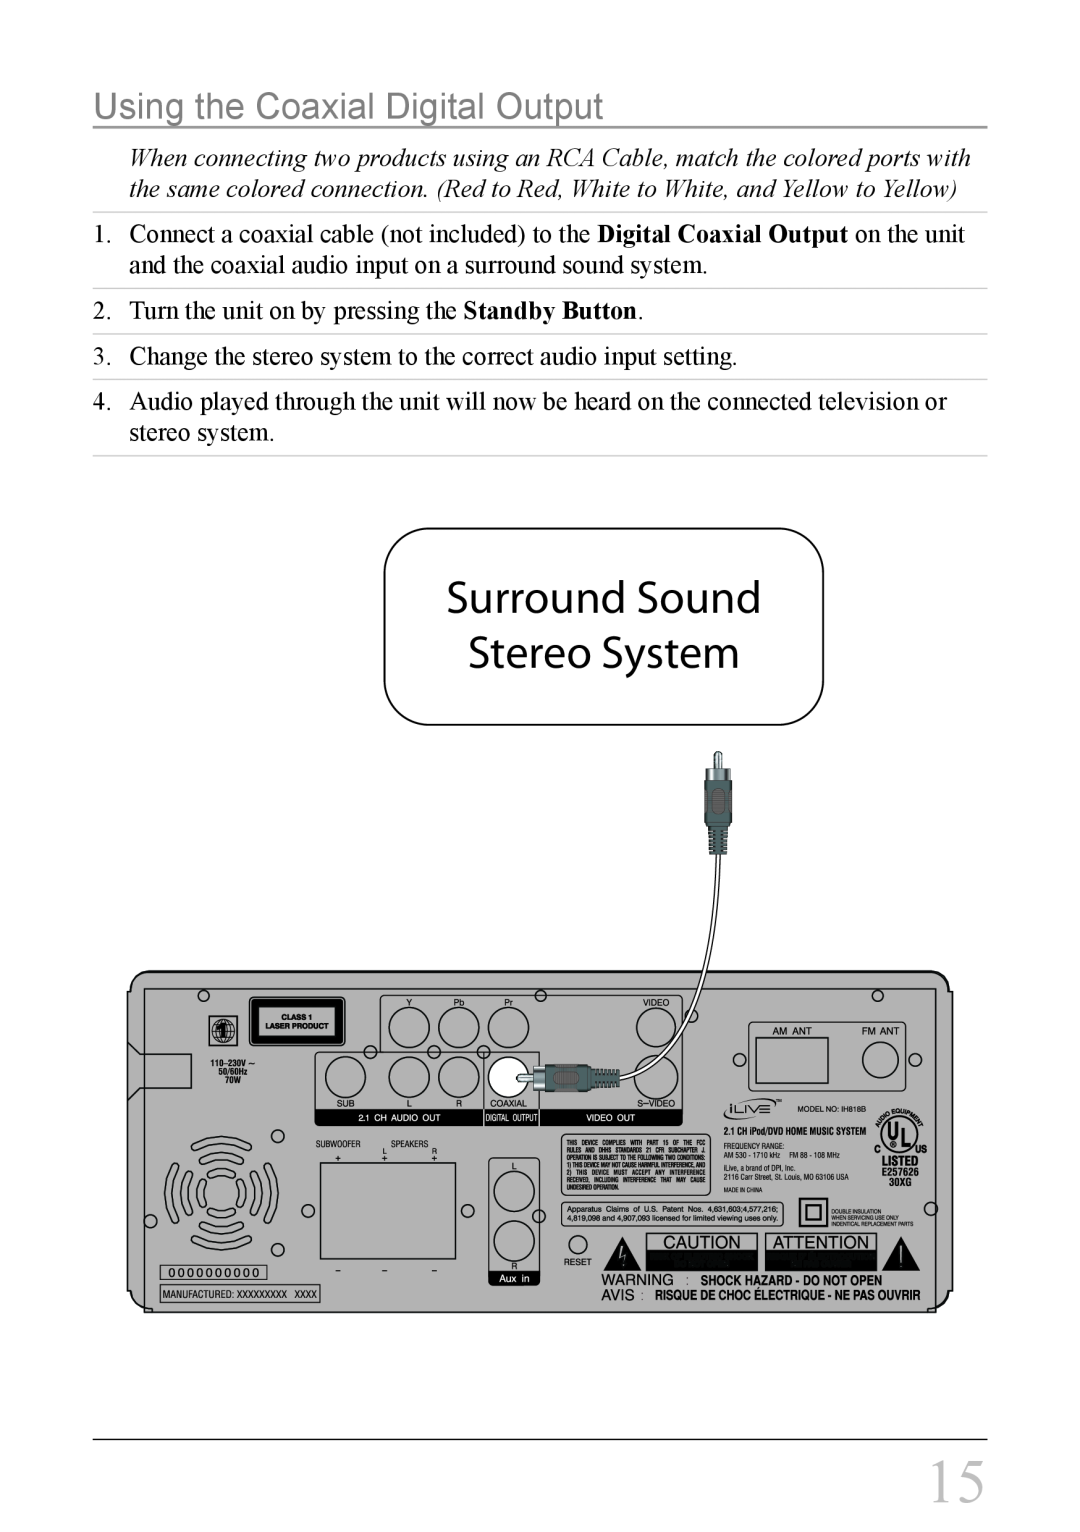 iLive IH818B instruction manual Using the Coaxial Digital Output, Surround Sound Stereo System 